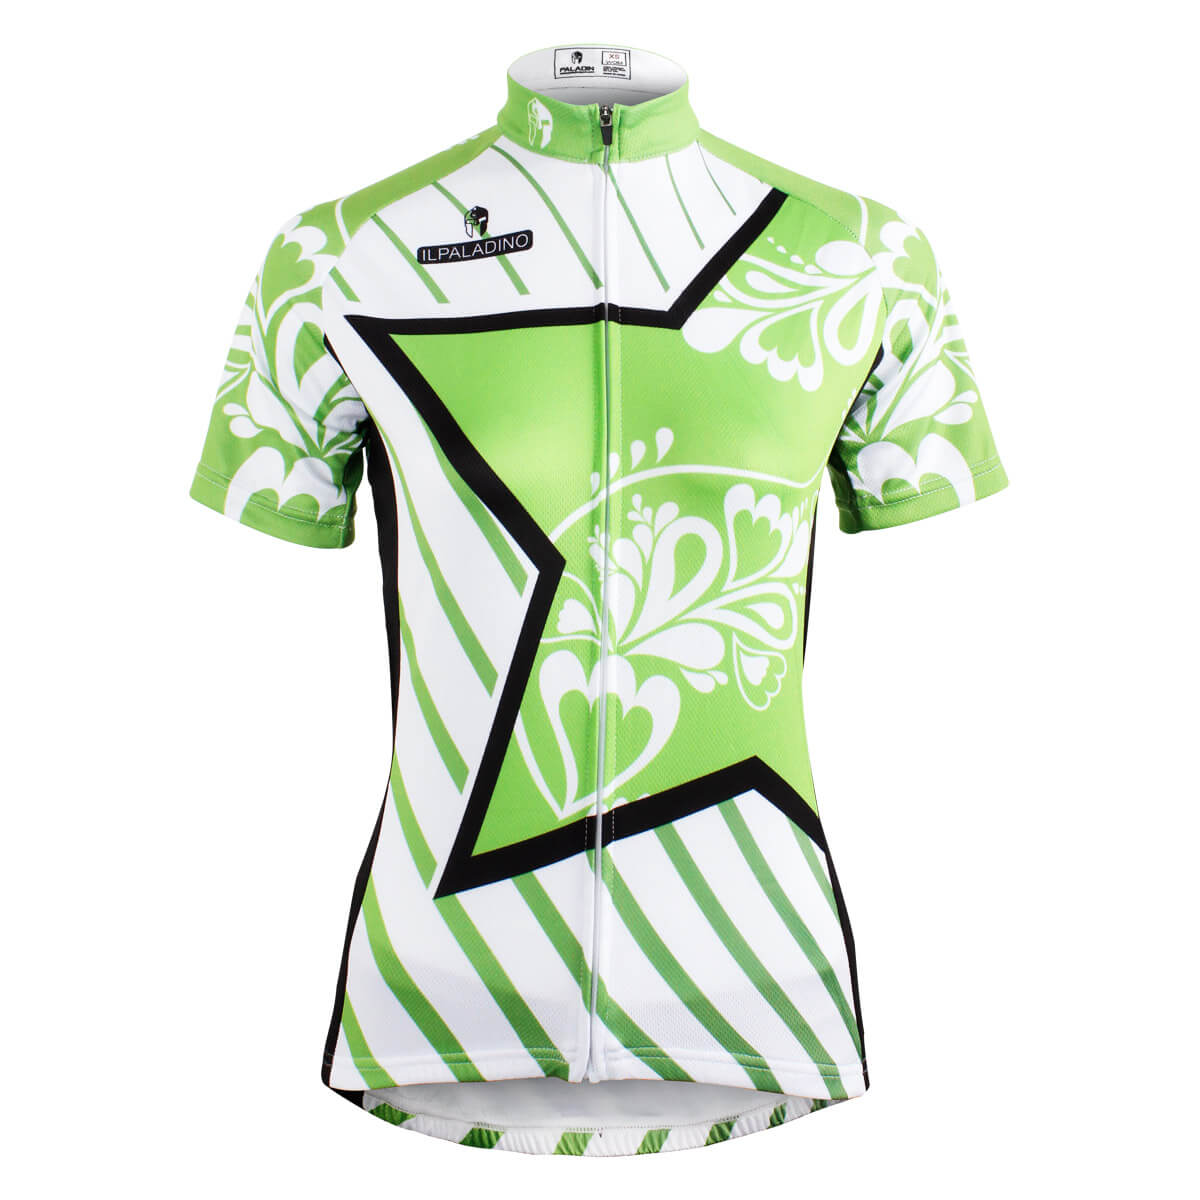 Five-pointed Star Diagonal Stripes Green Cycling Jerseys For Women ...